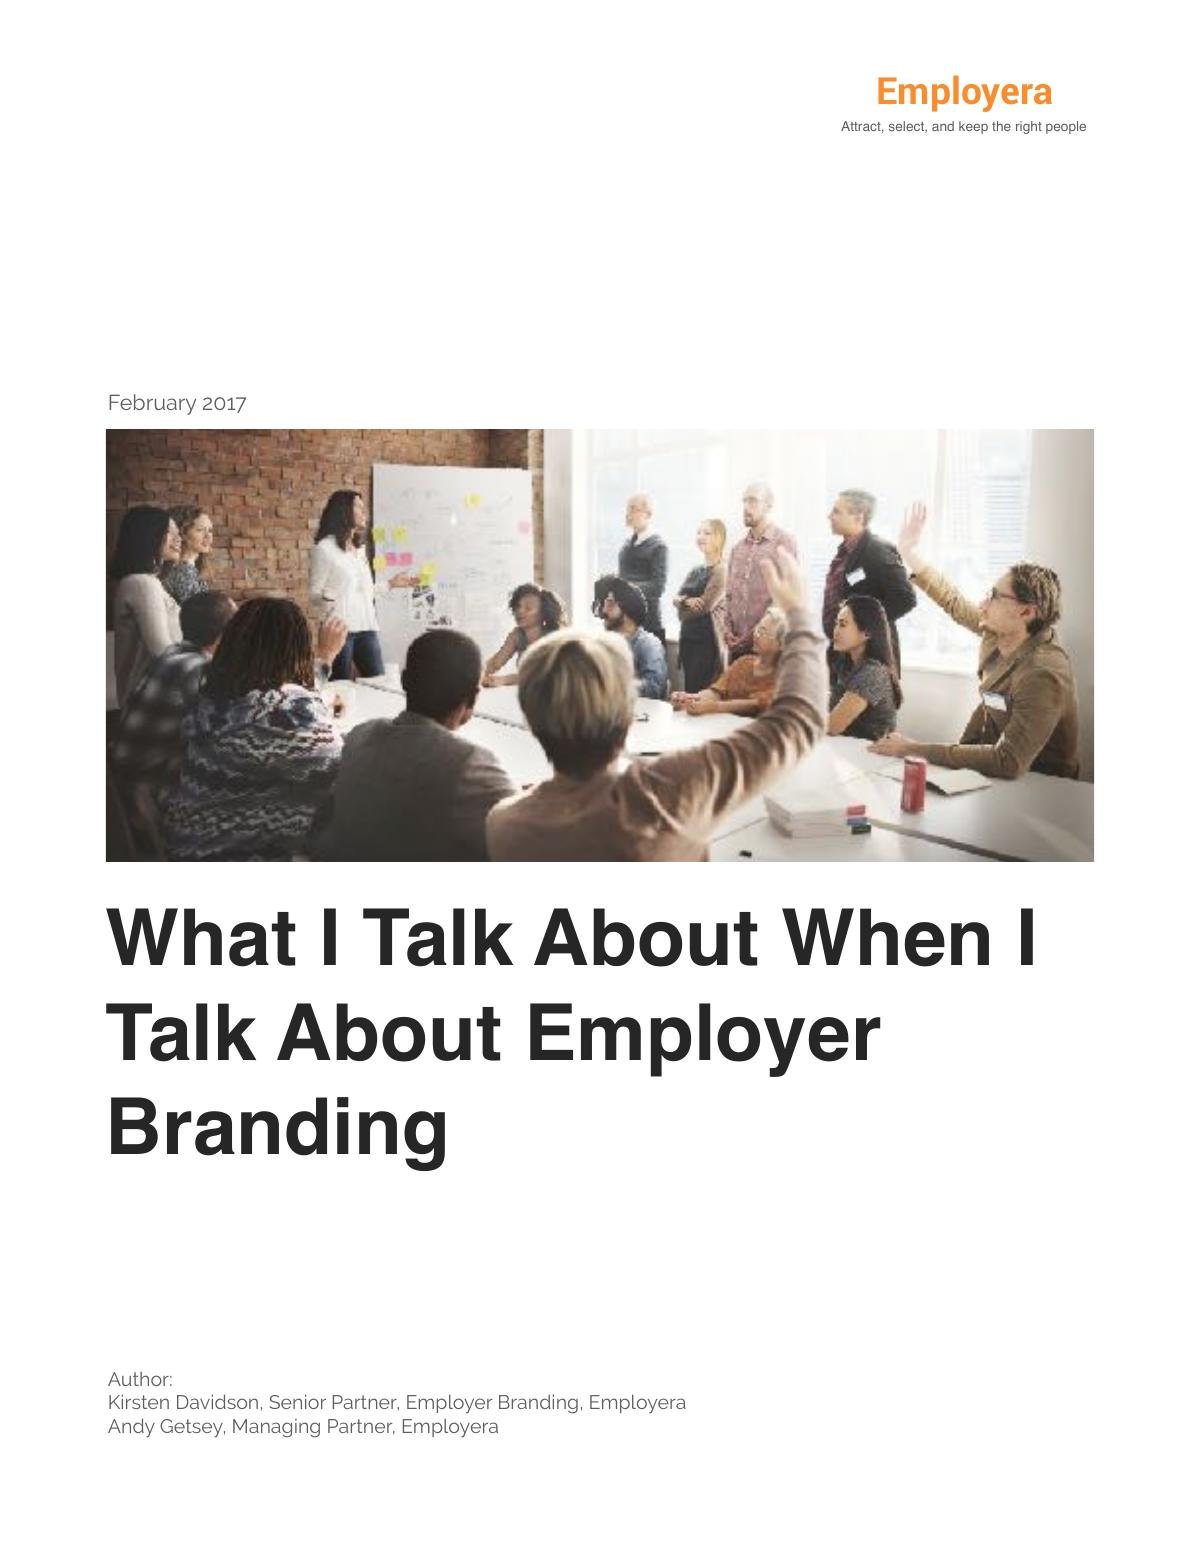 What I Talk About When I Talk About Employer Brand